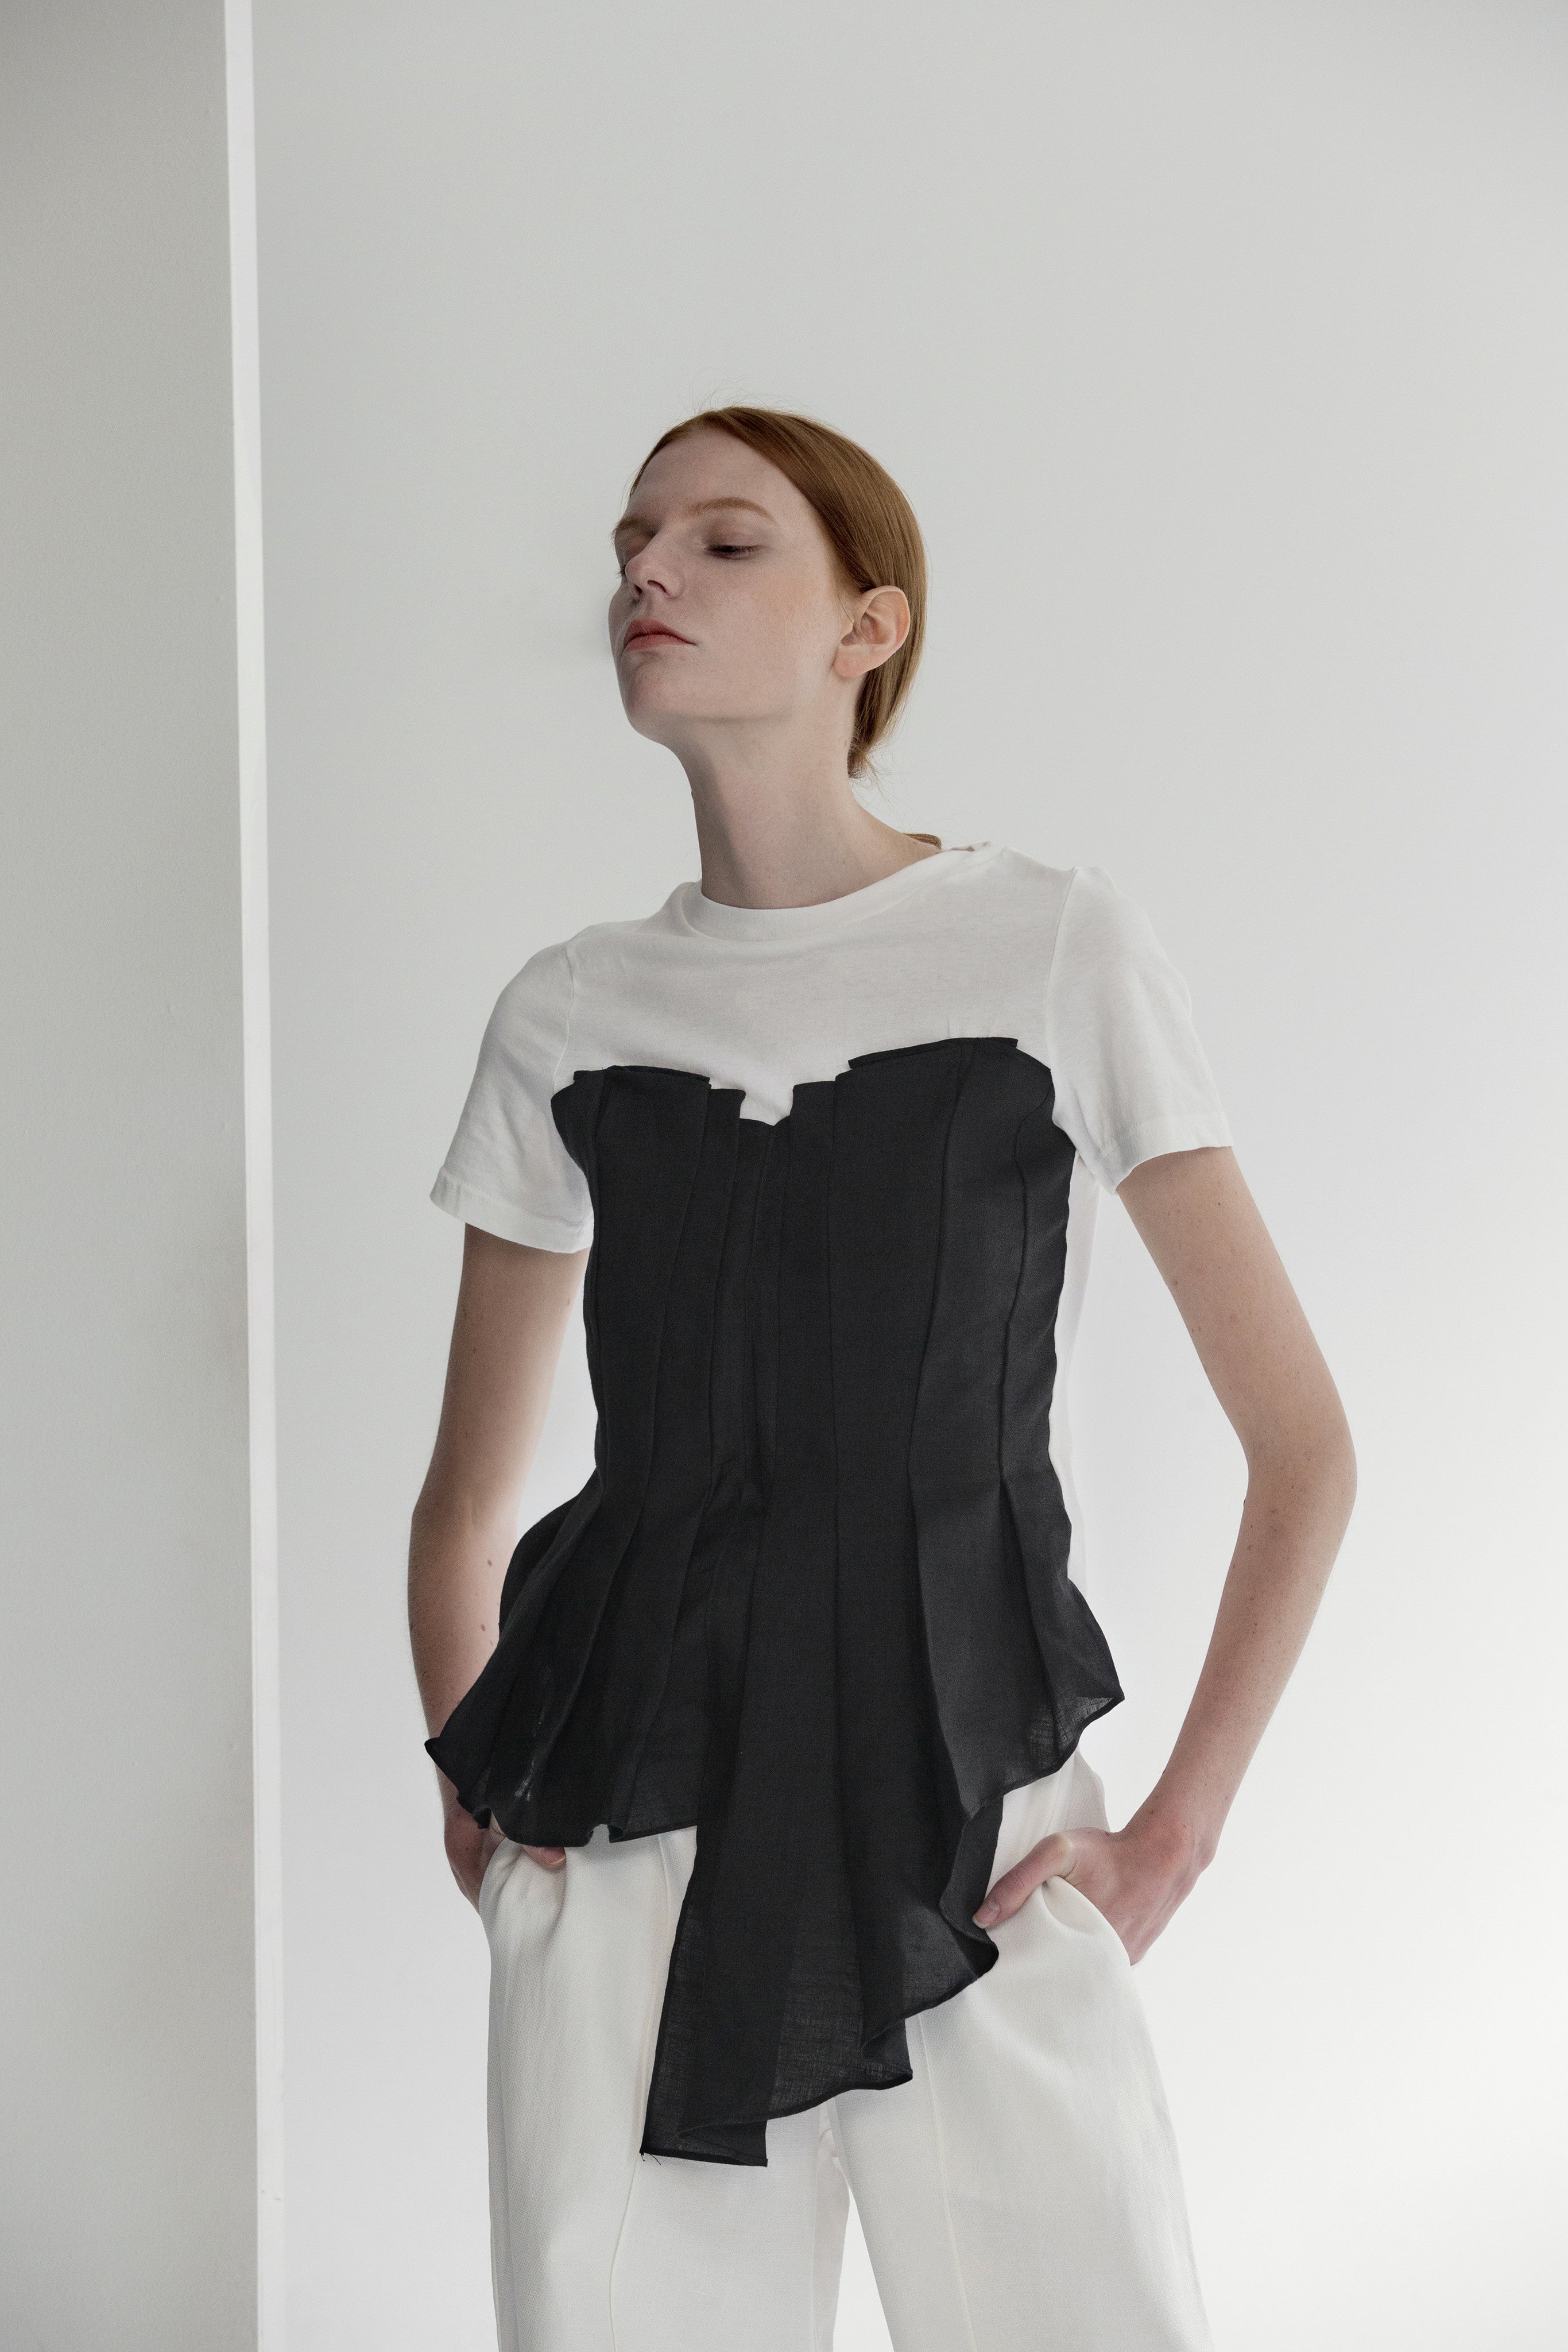 Tee shirt inspired Harvey Top in short sleeve with boat neckline, folded asymmetric origami bodice detailing. Pull on.